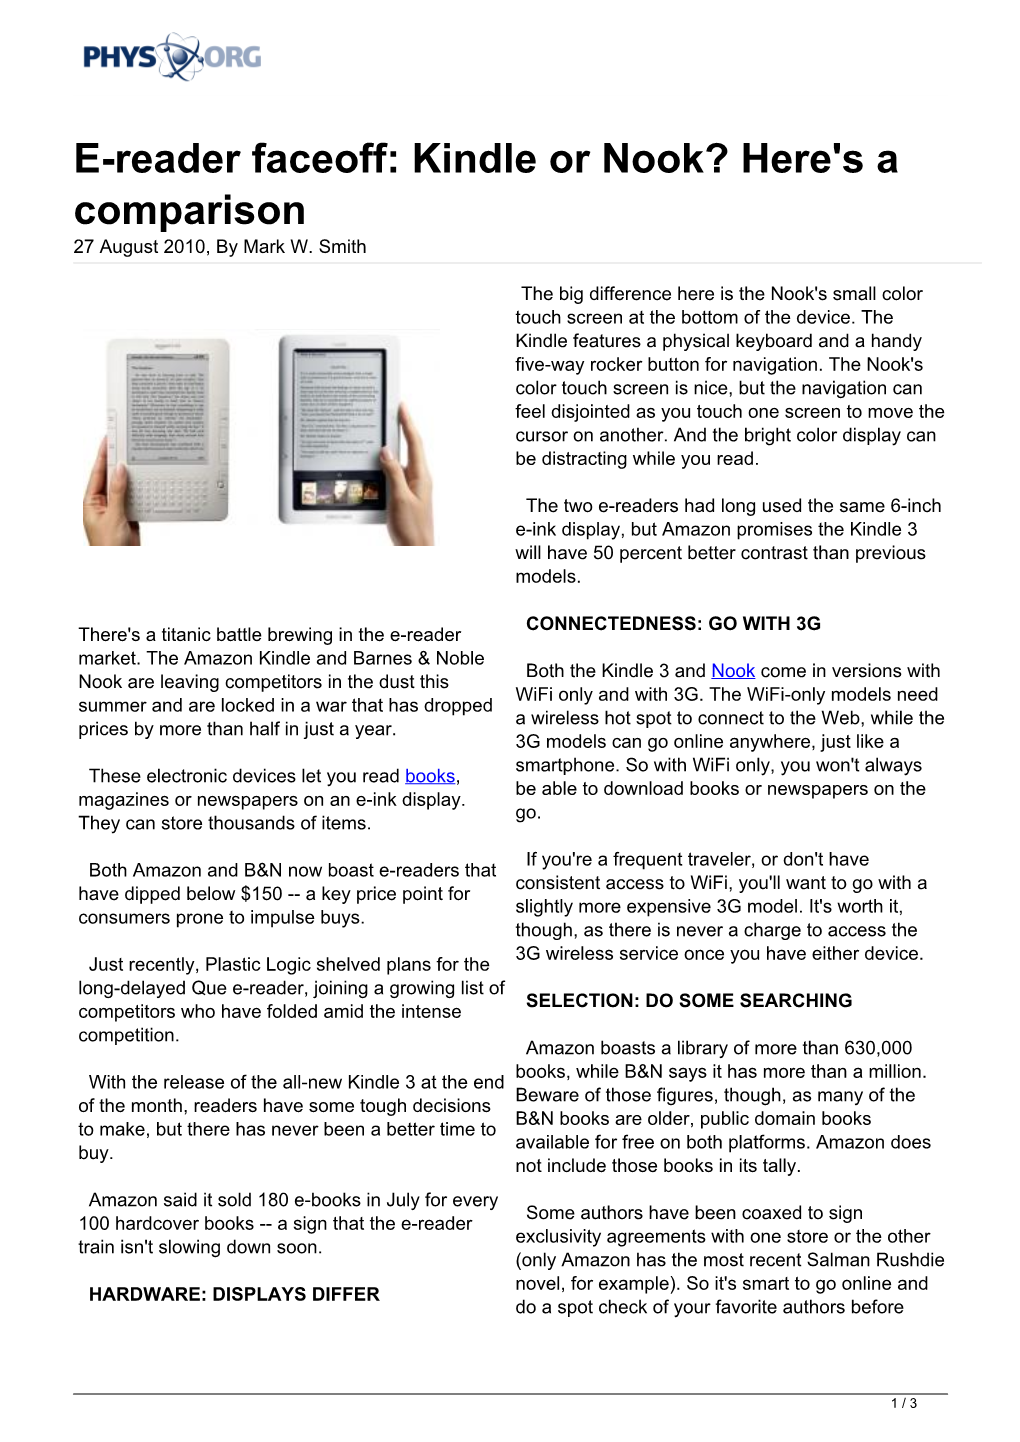 E-Reader Faceoff: Kindle Or Nook? Here's a Comparison 27 August 2010, by Mark W